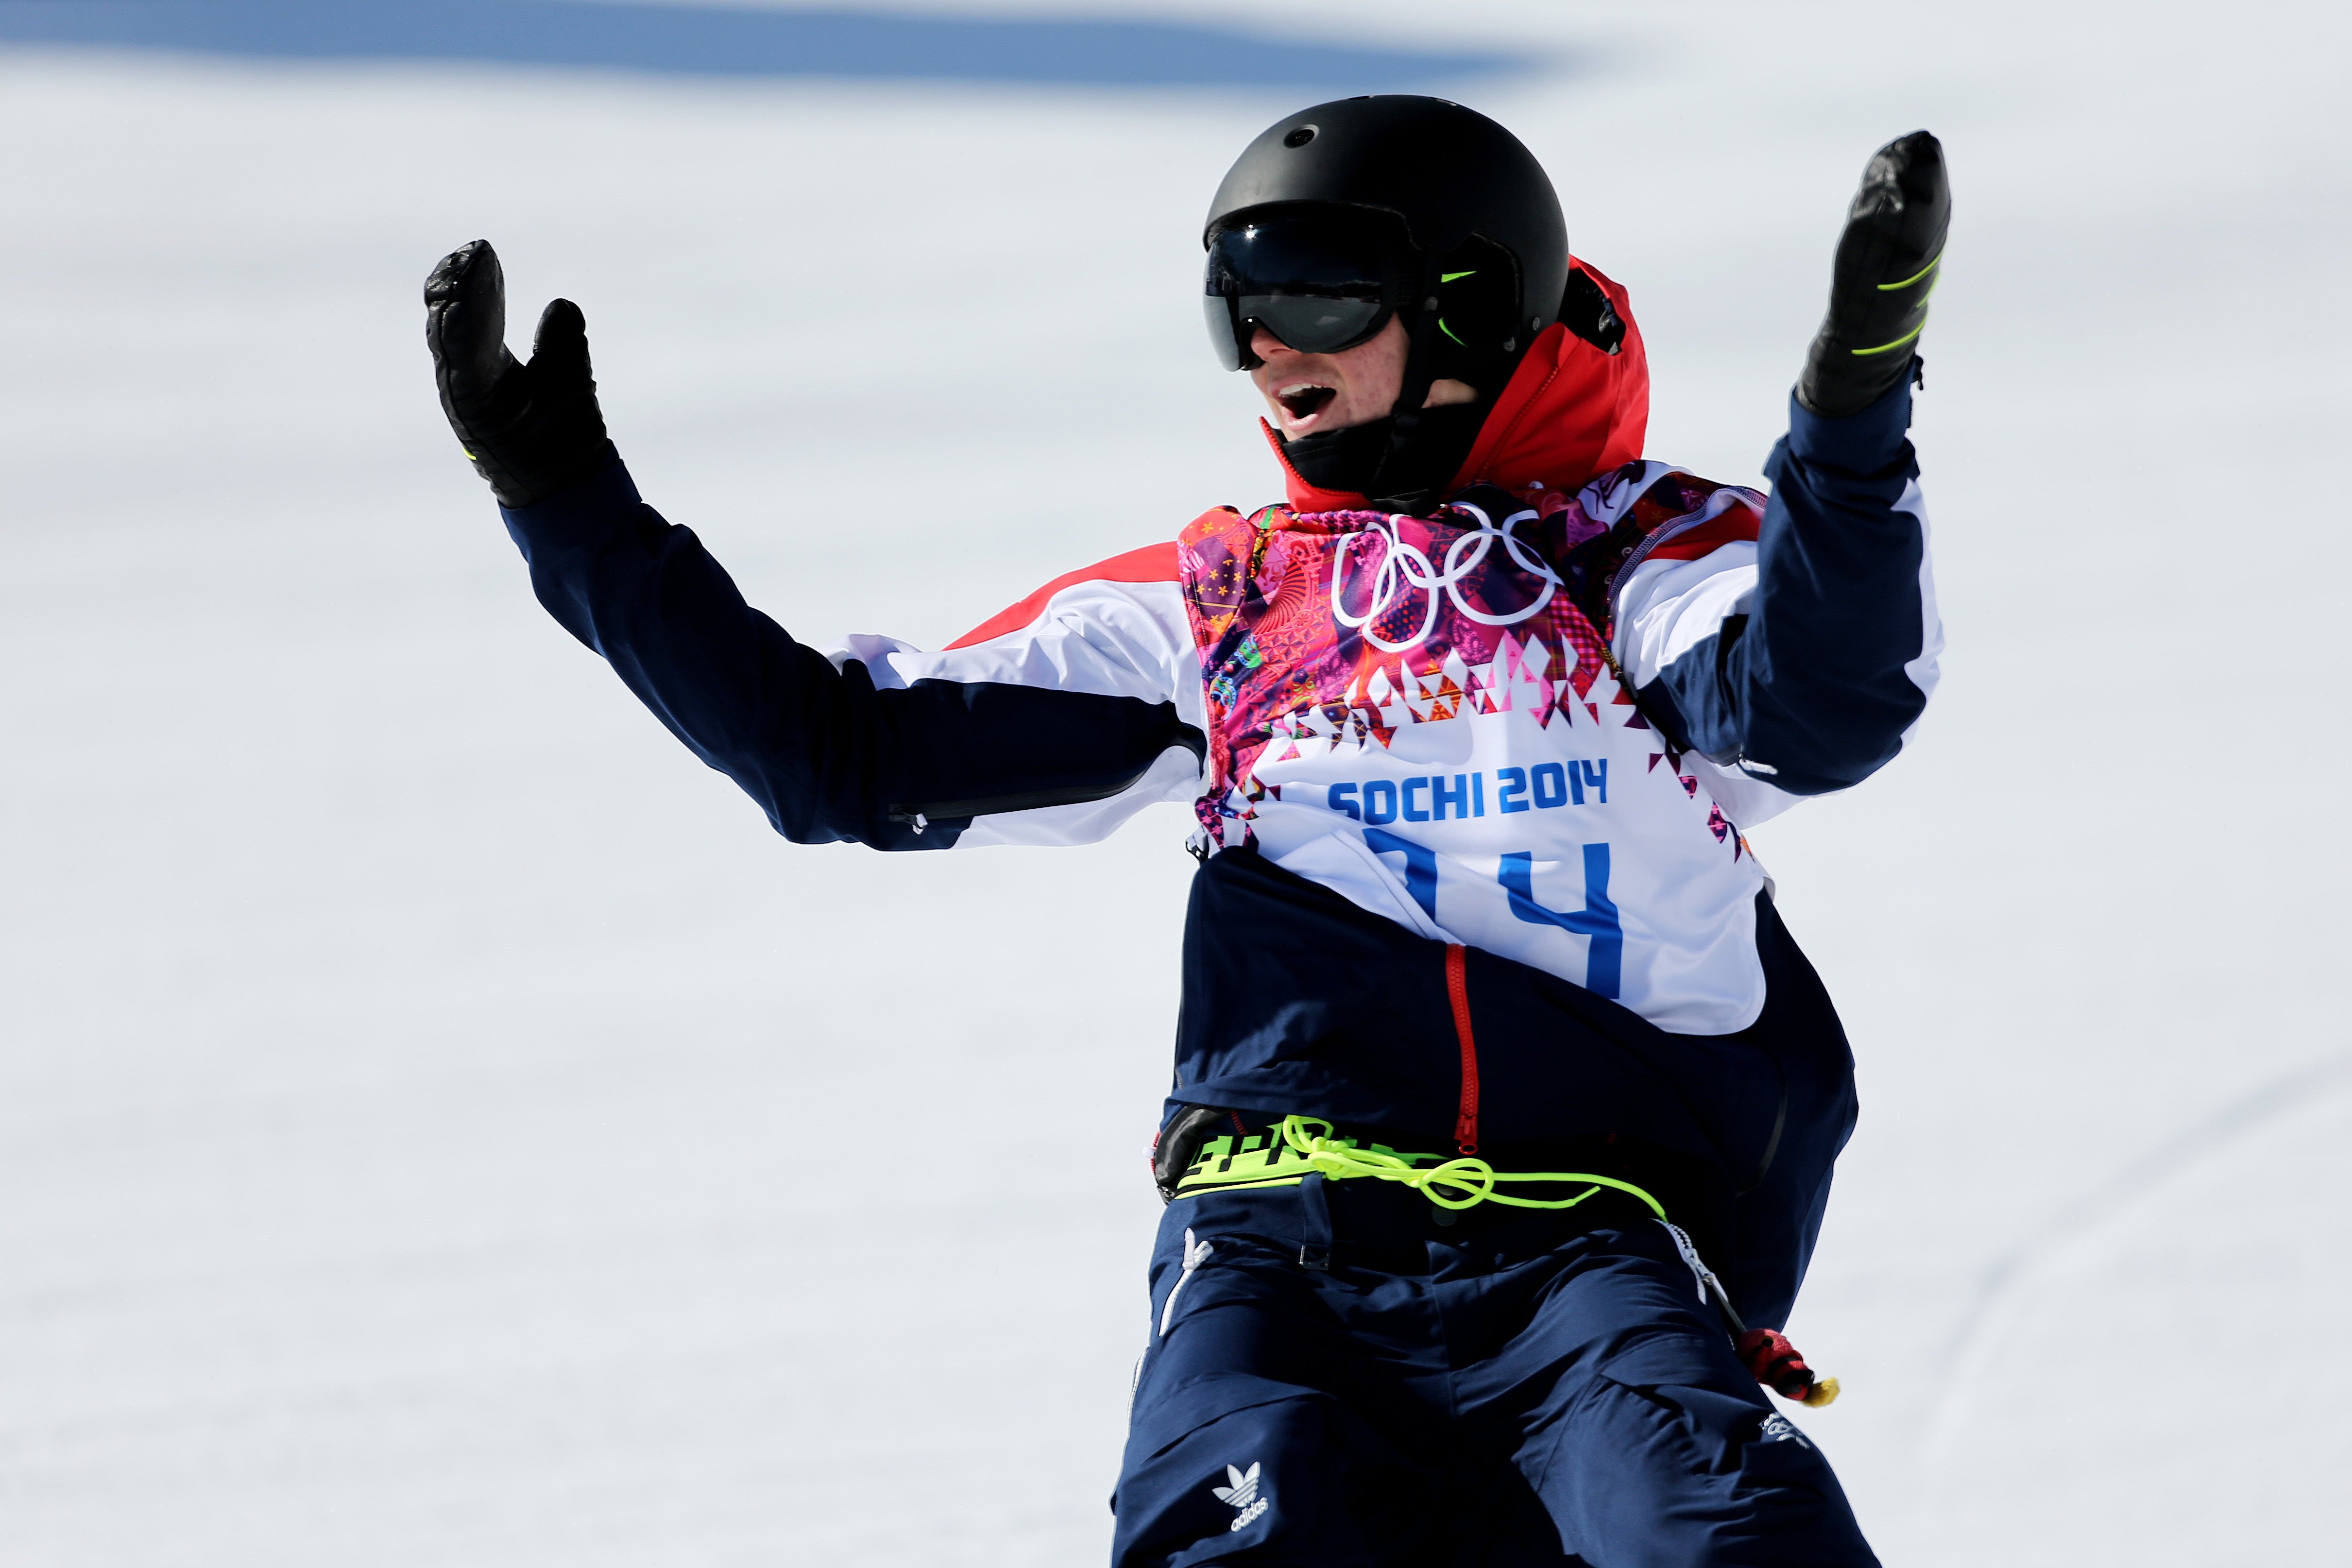 Jamie Nicholls finished sixth in the men’s slopestyle at the 2014 Games in Sochi (Andrew Milligan/PA)